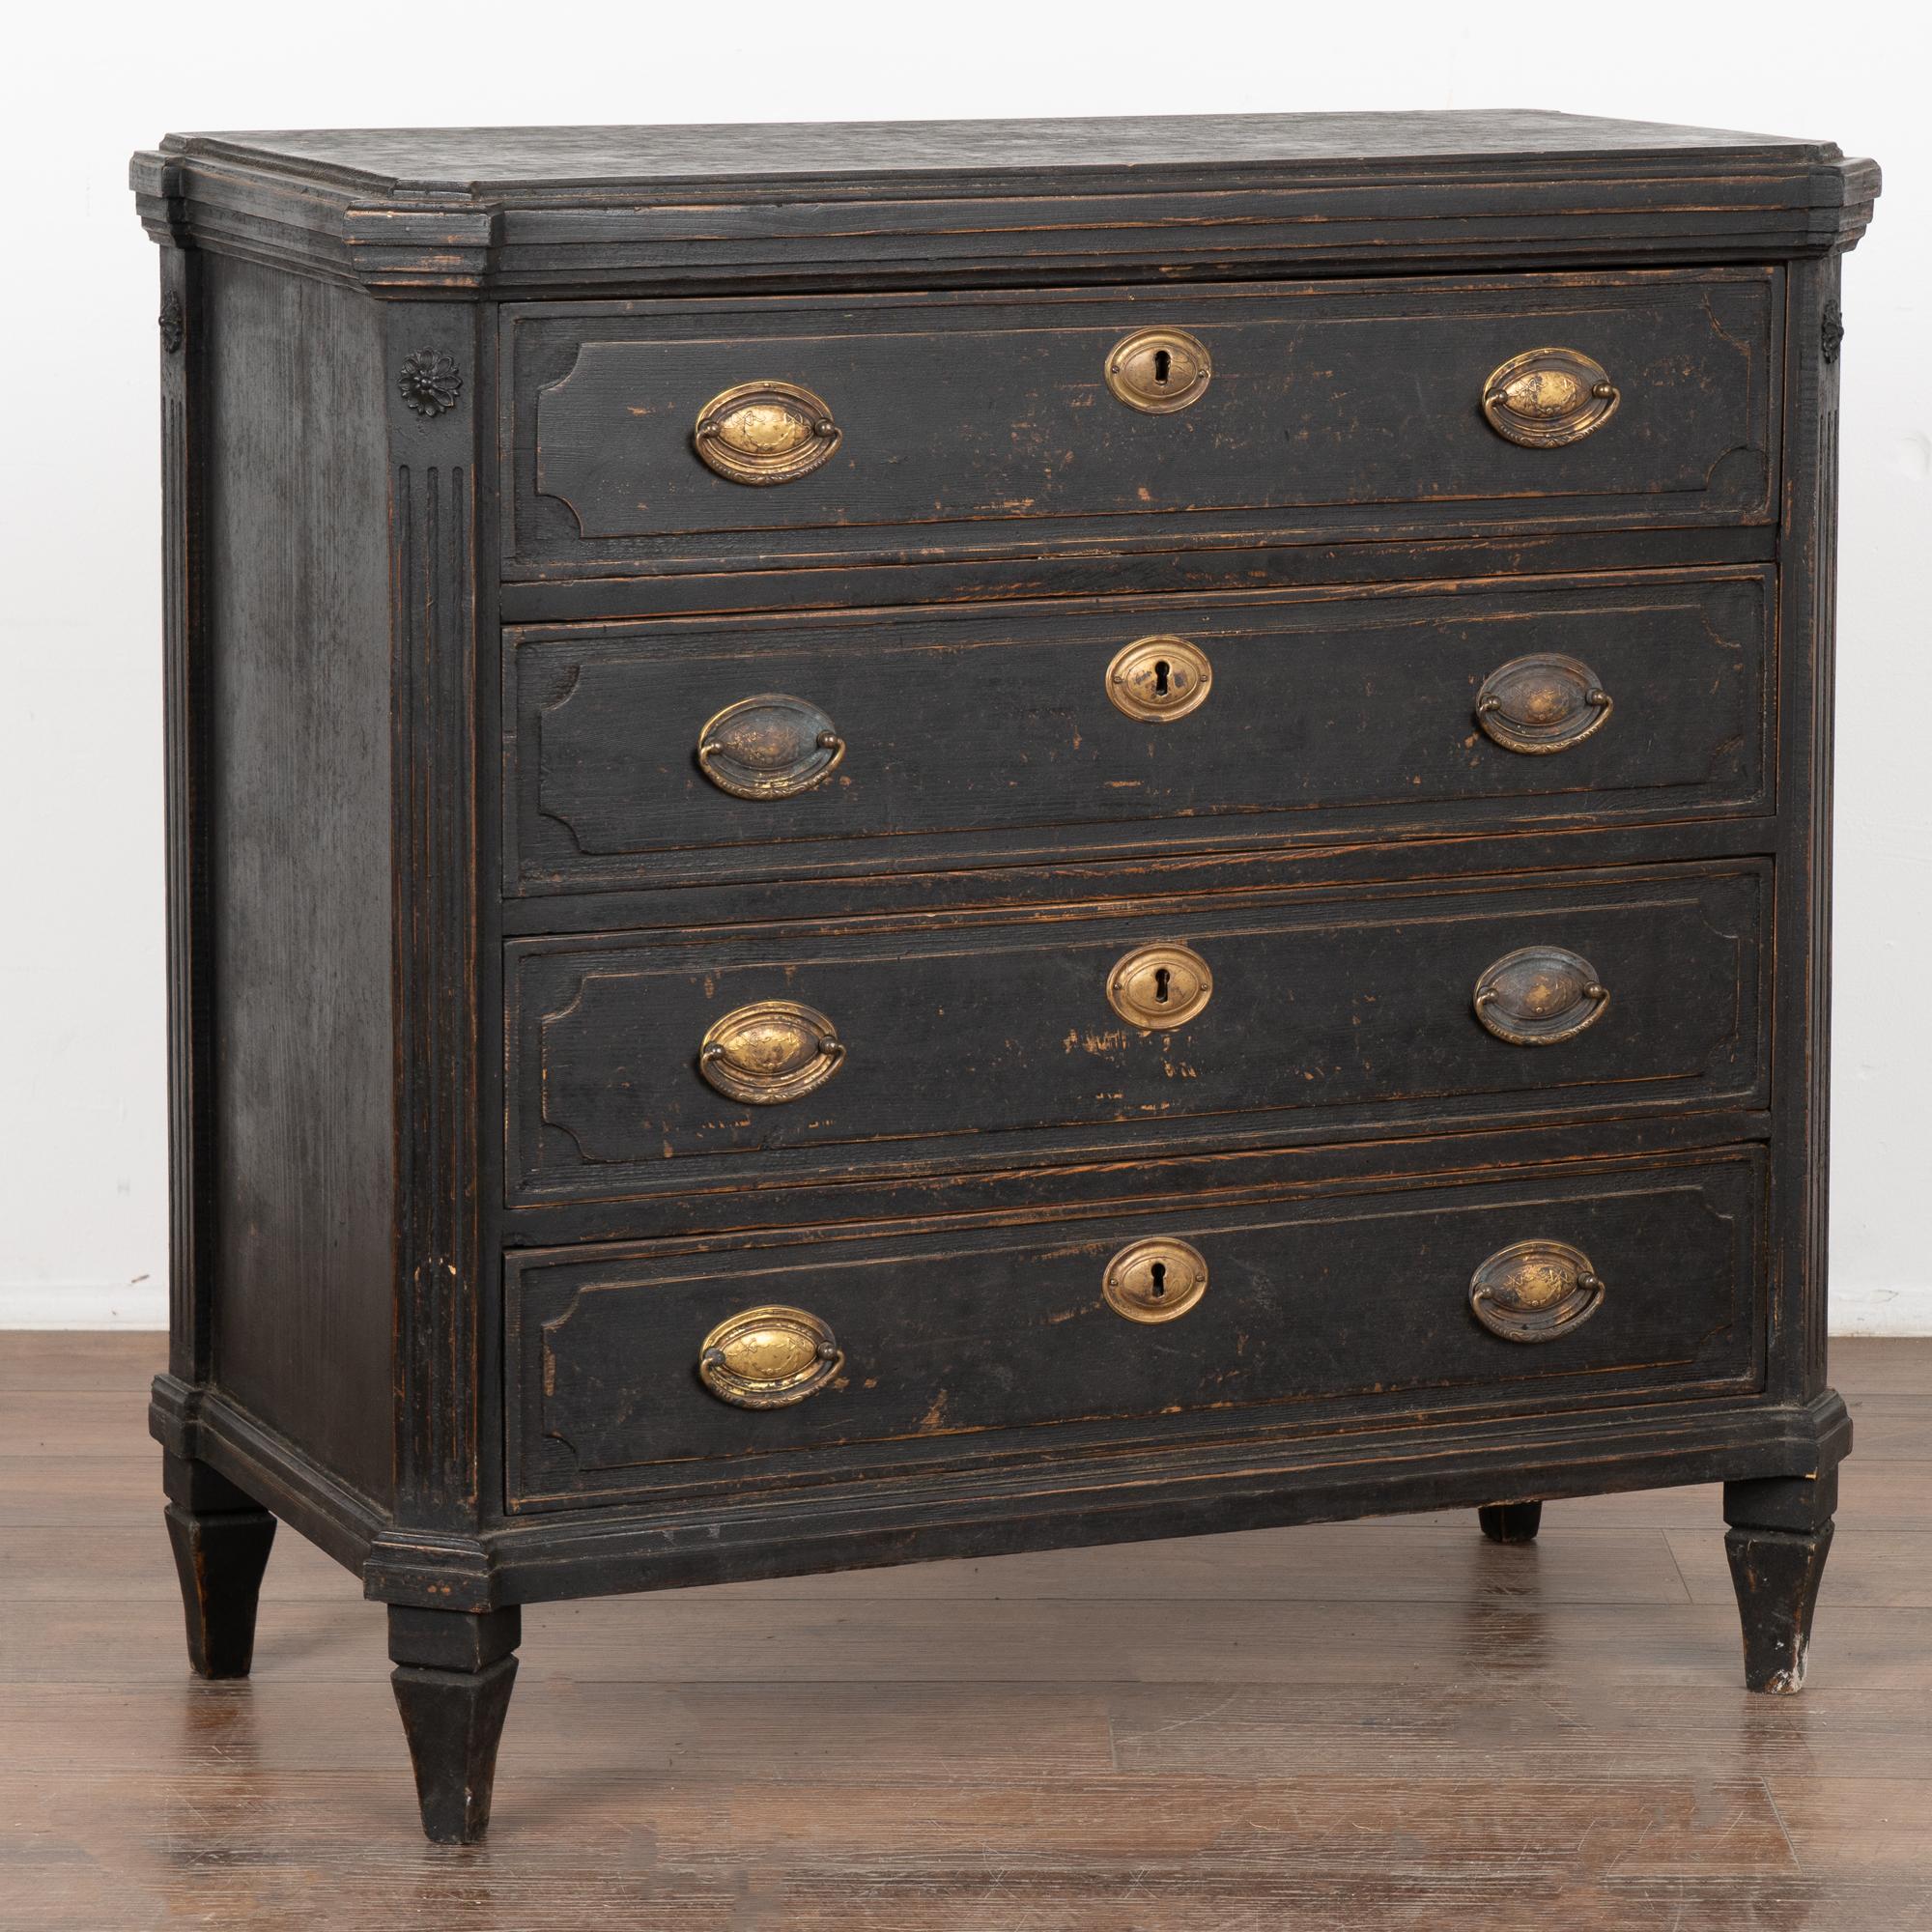 Swedish pine chest of drawers with professional custom black painted finish.
Top with profiled edge, canted carved sides and raised on tapered feet.
Four drawers with raised panels and two brass pulls each.
Restored, later professional painted and